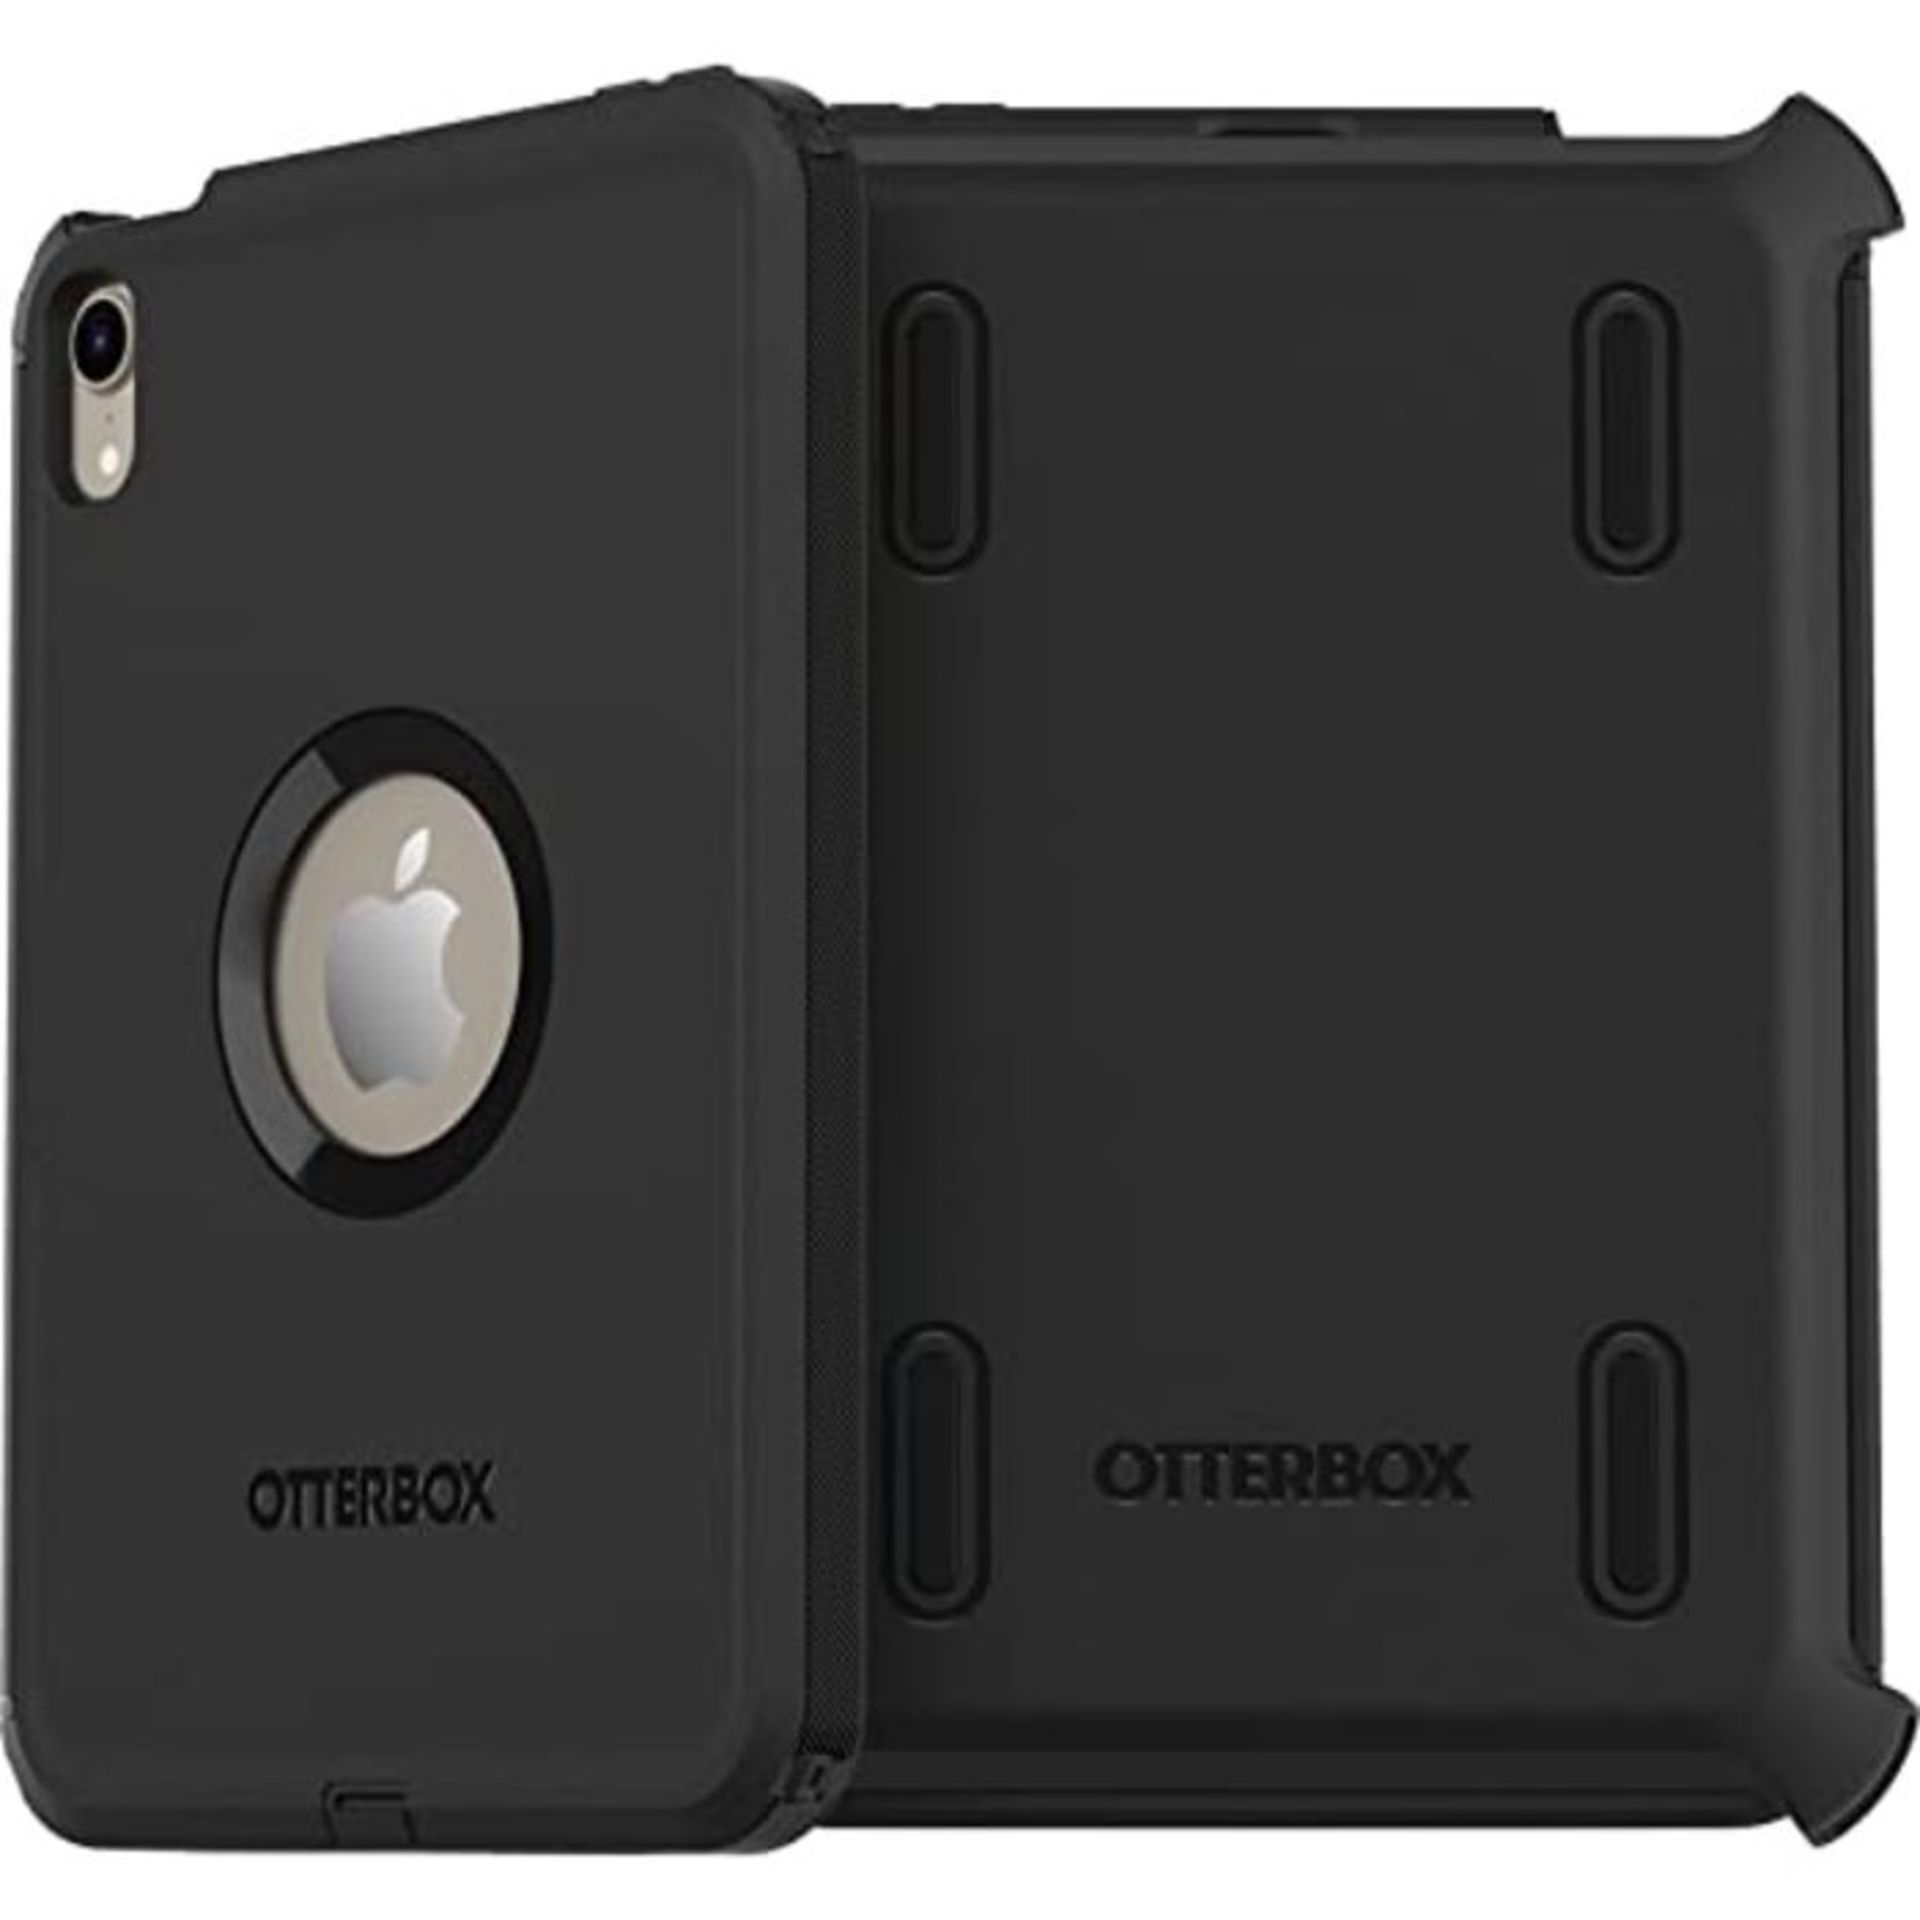 OtterBox Defender Case for iPad Mini 8.3-Inch (6th gen 2021), Shockproof, Ultra-Rugged - Image 4 of 6